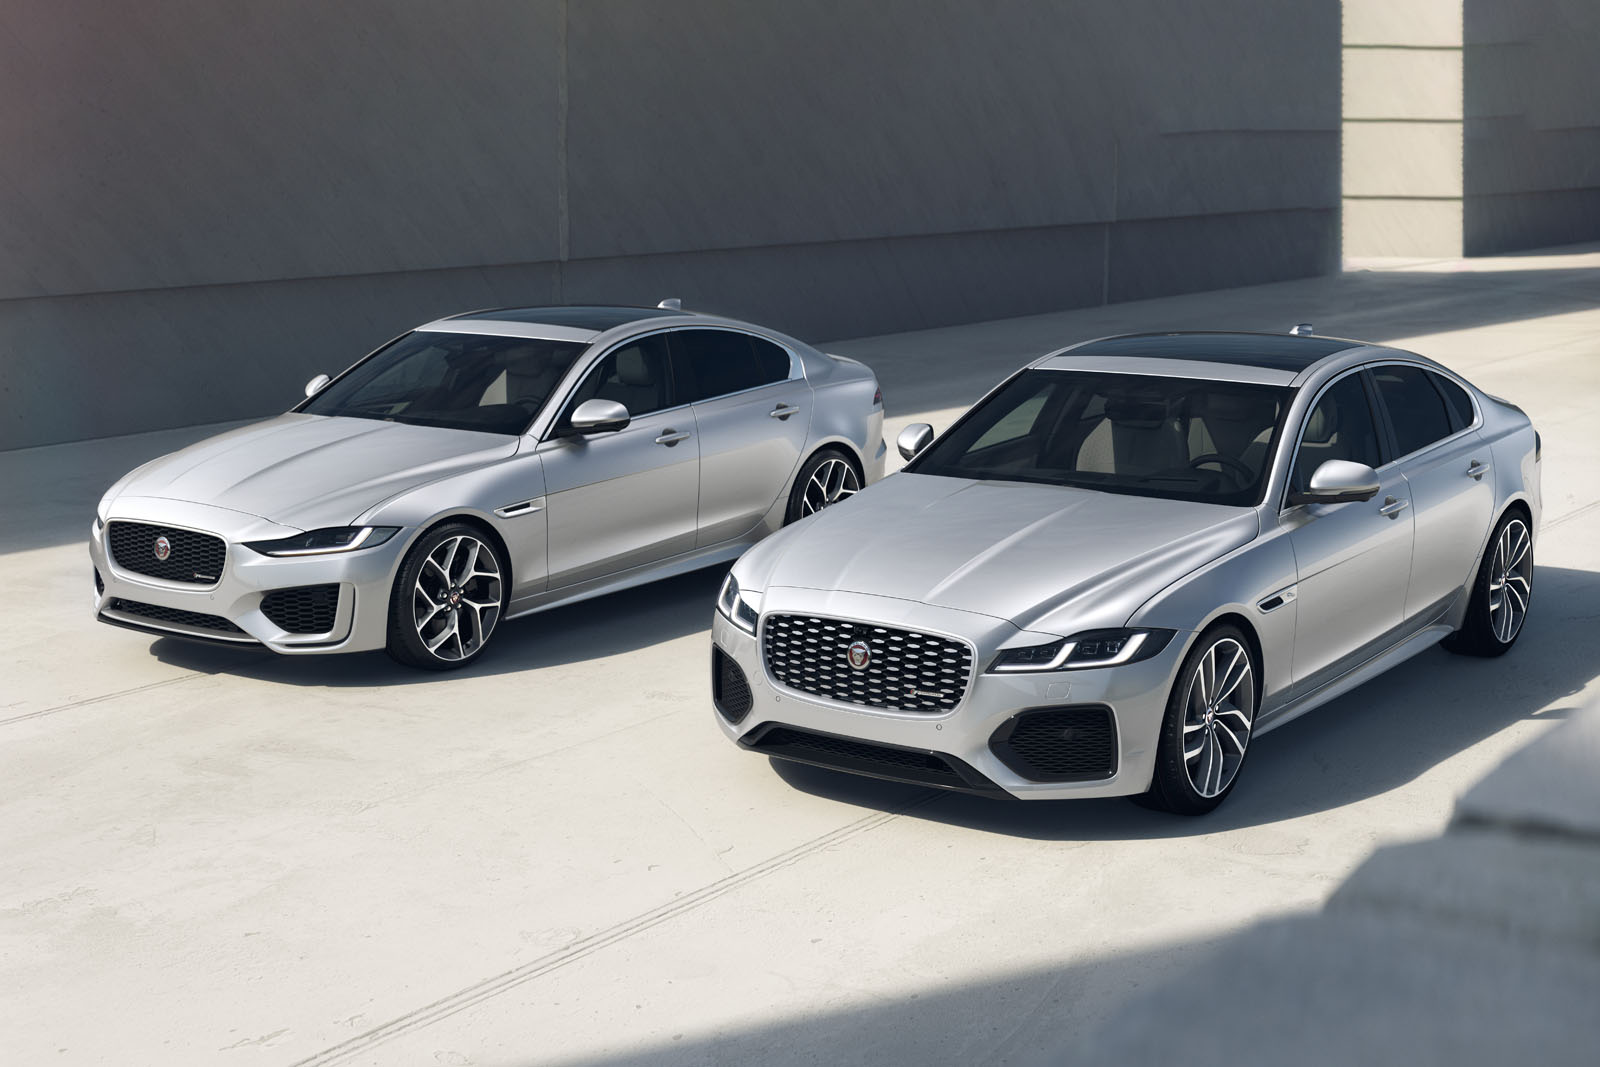 Jaguar XF and XE back on sale as JLR chip shortage eases